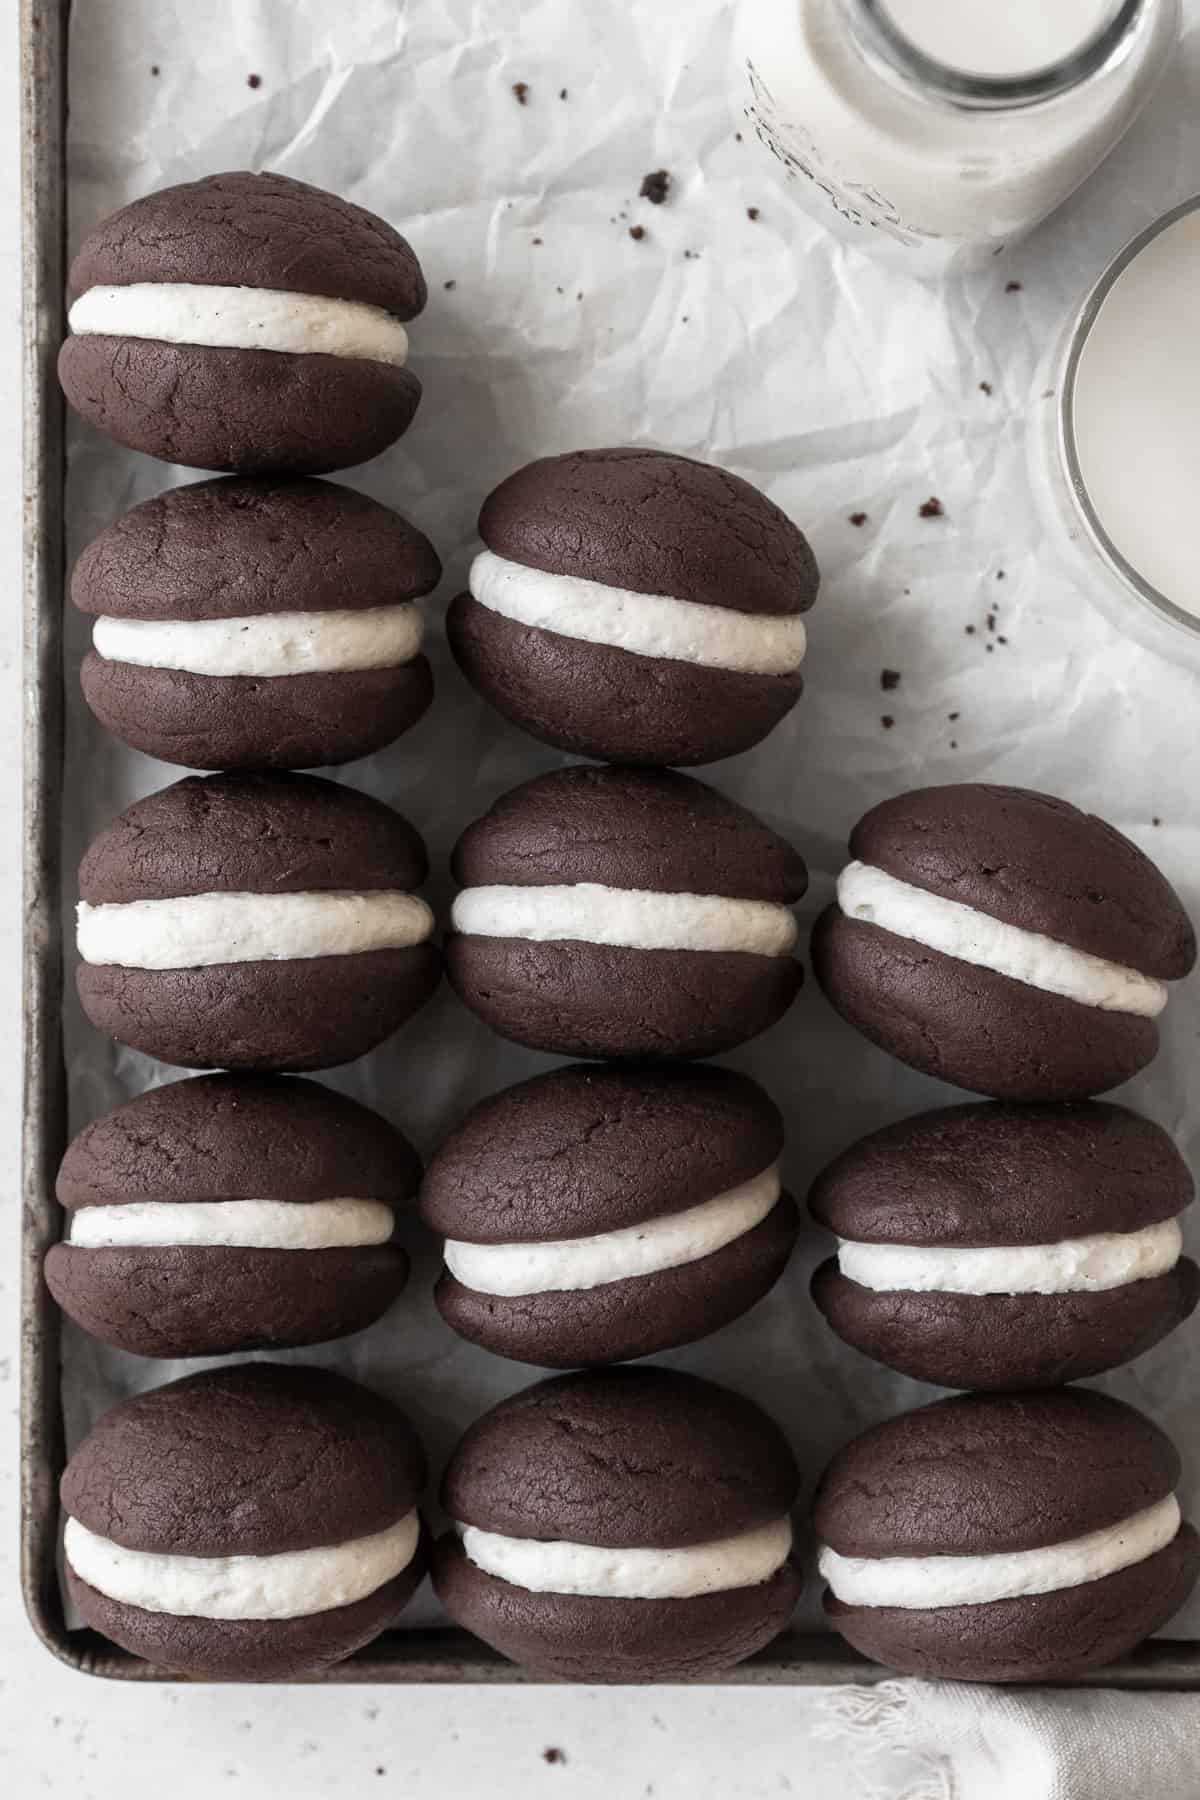 Gluten-free whoopie pies on a parchment-paper lined baking tray.